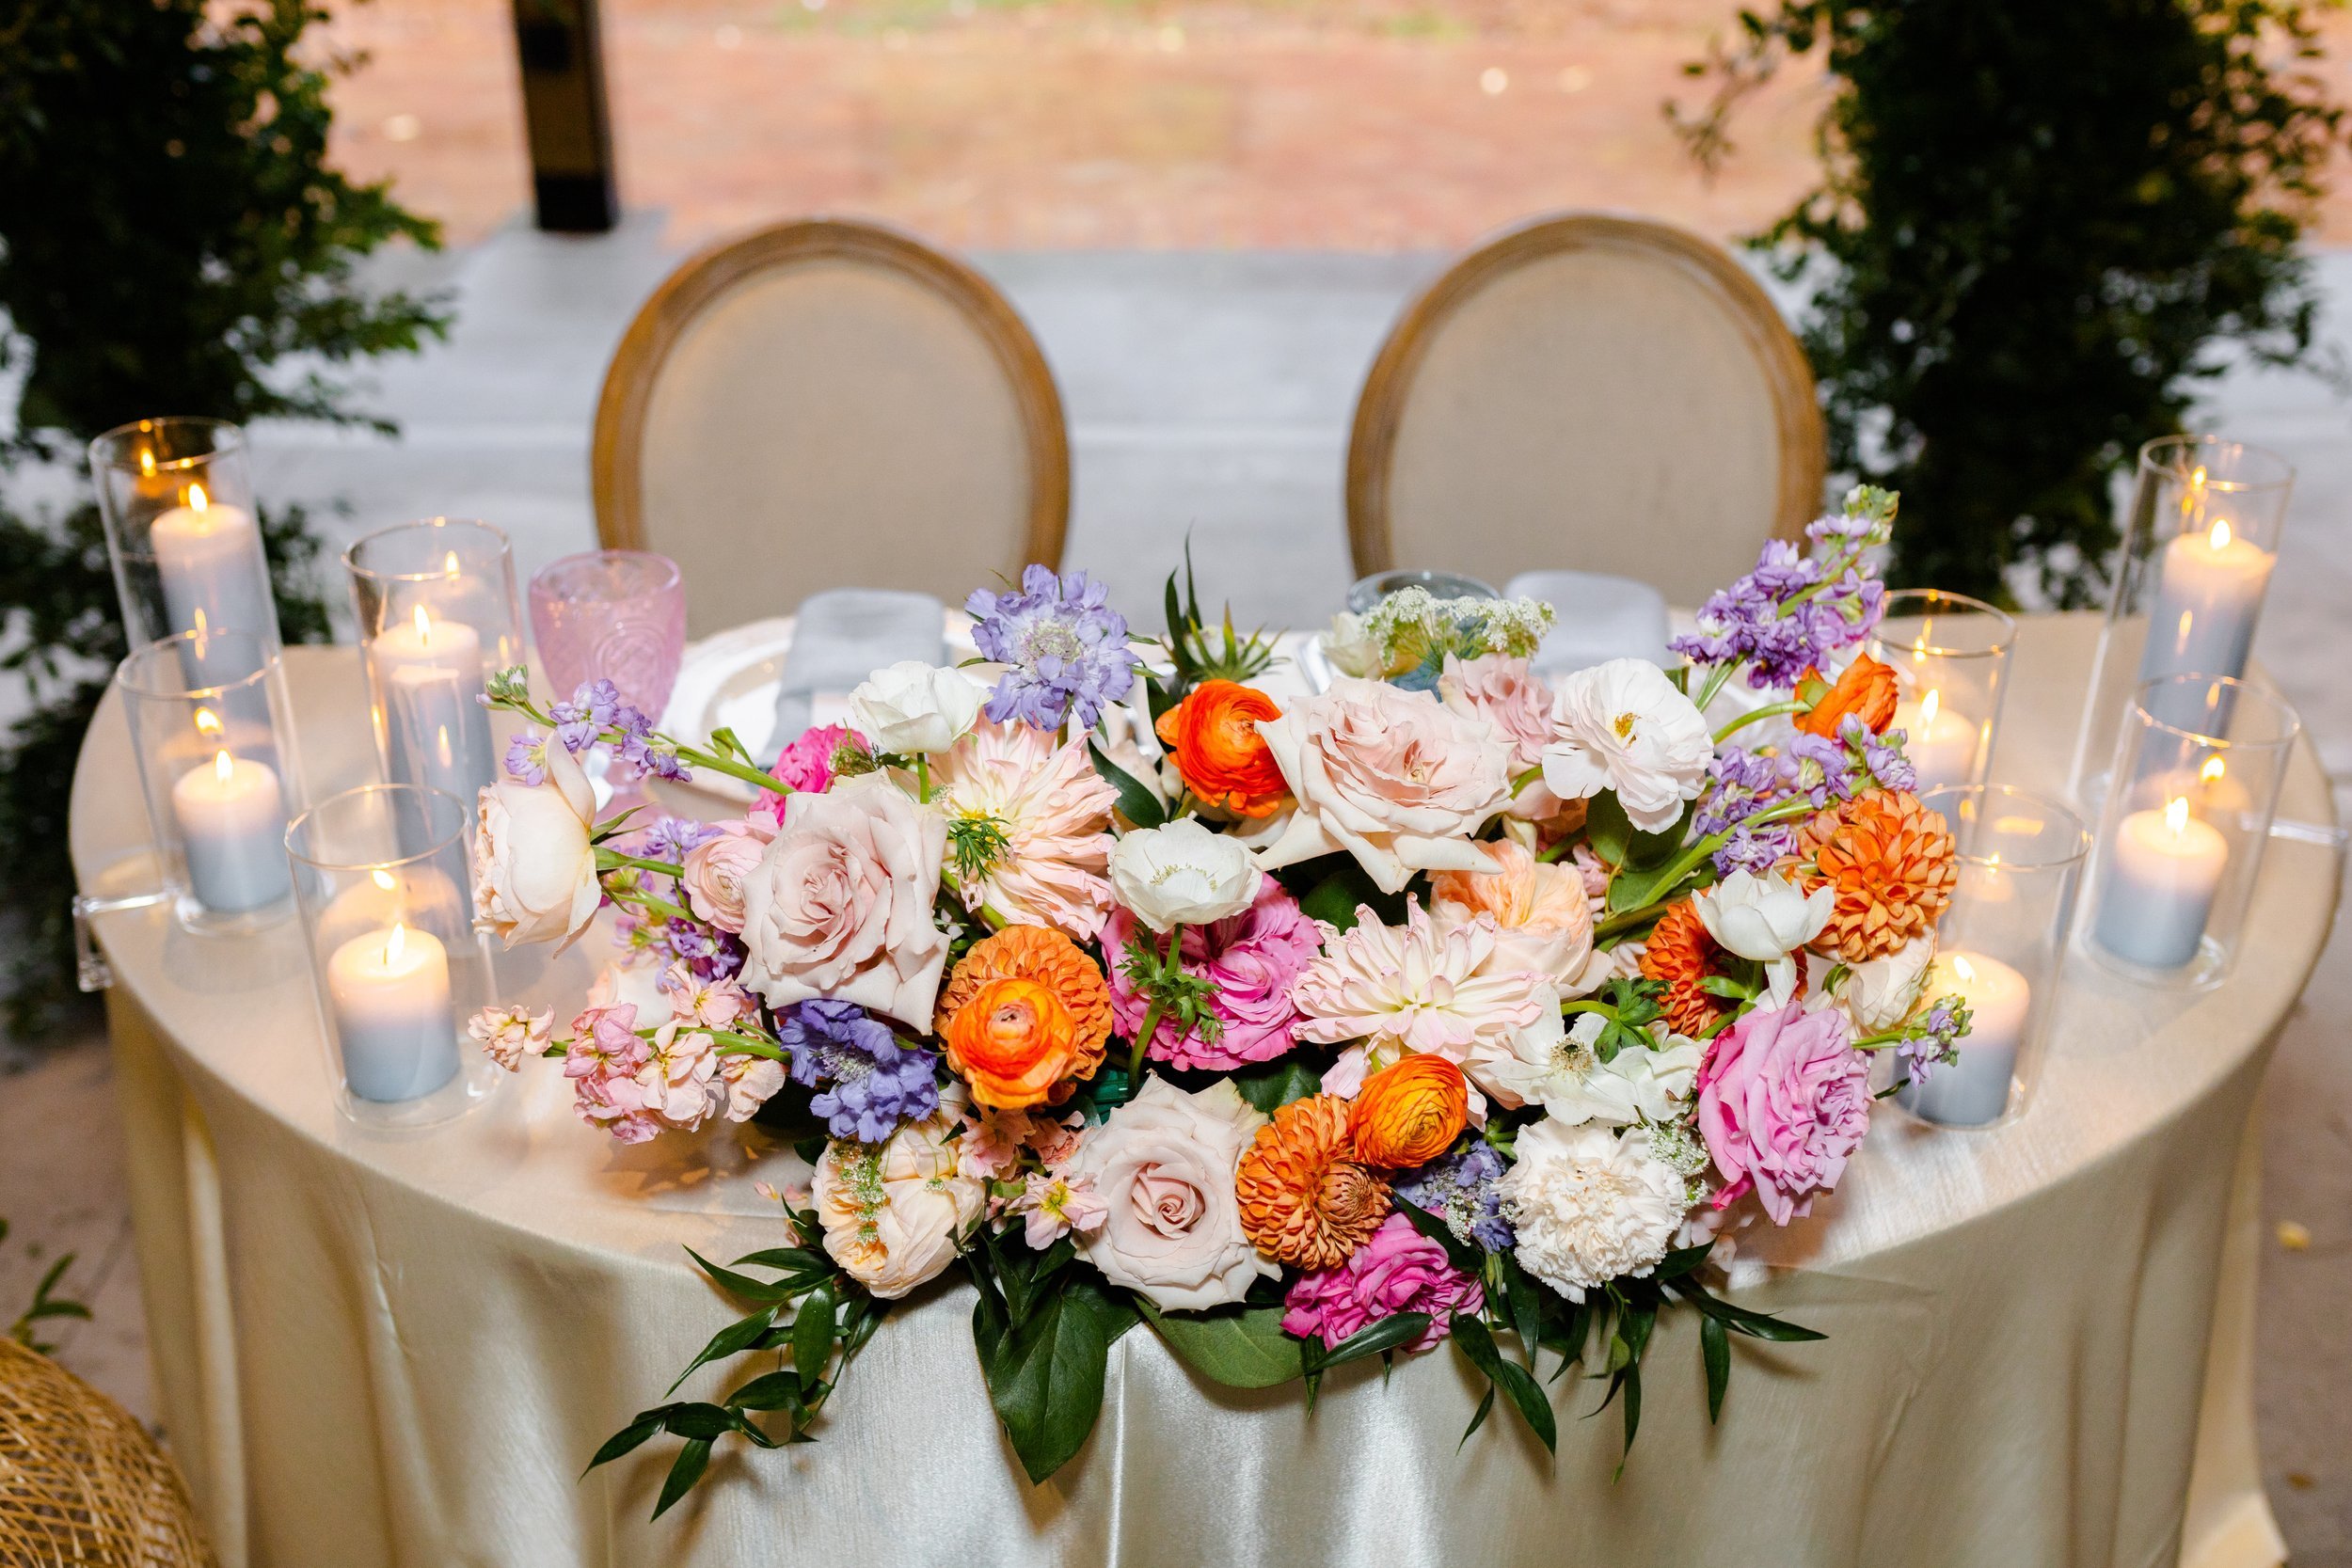 sam-and-coys-bright-and-colorful-garden-wedding-at-ships-of-the-sea-in-savannah-georgia-with-colorful-wedding-florals-desinged-by-savannah-florist-ivory-and-beau-savannah-wedding-savannah-wedding-flowers-savannah-florist-27.jpg